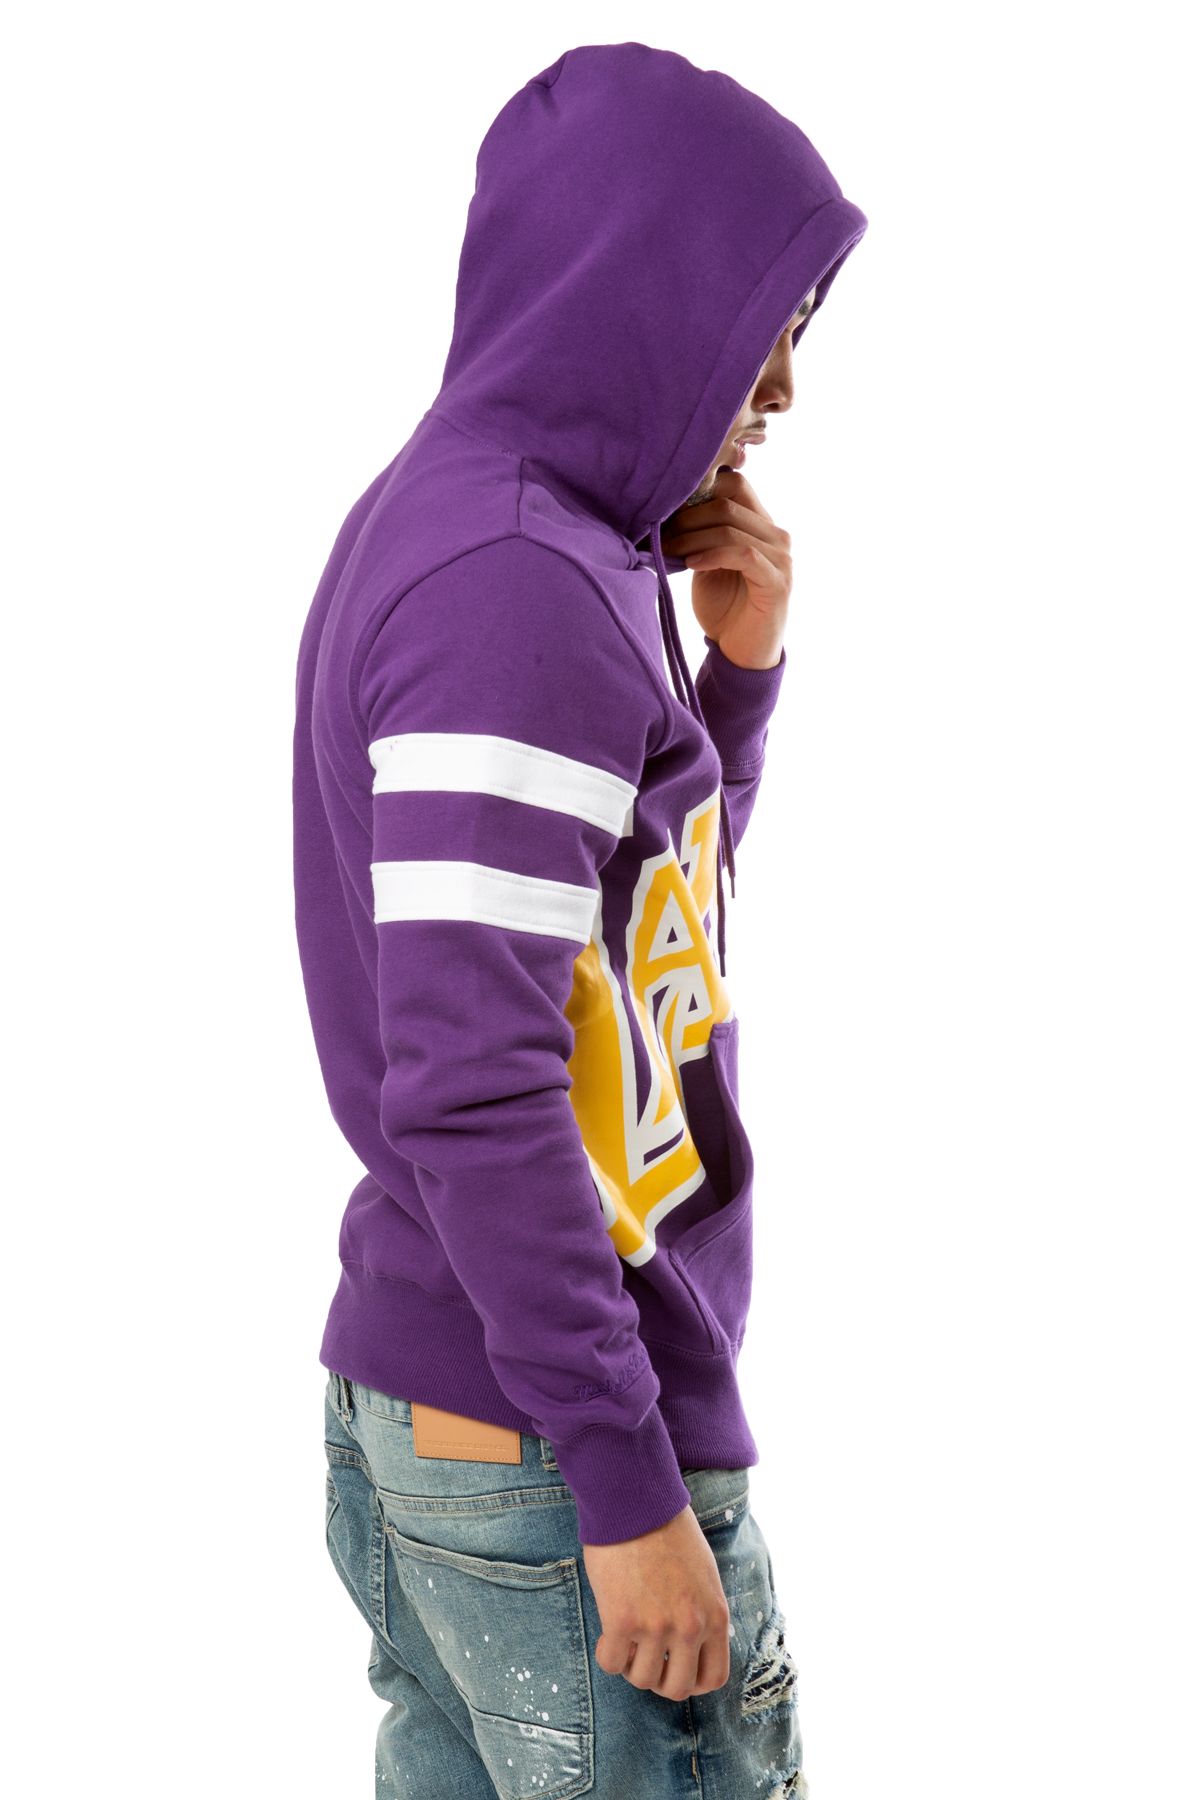 MITCHELL AND NESS Laker NBA Pullover Hoodie BMPHDP21084-LALOLIV - Shiekh